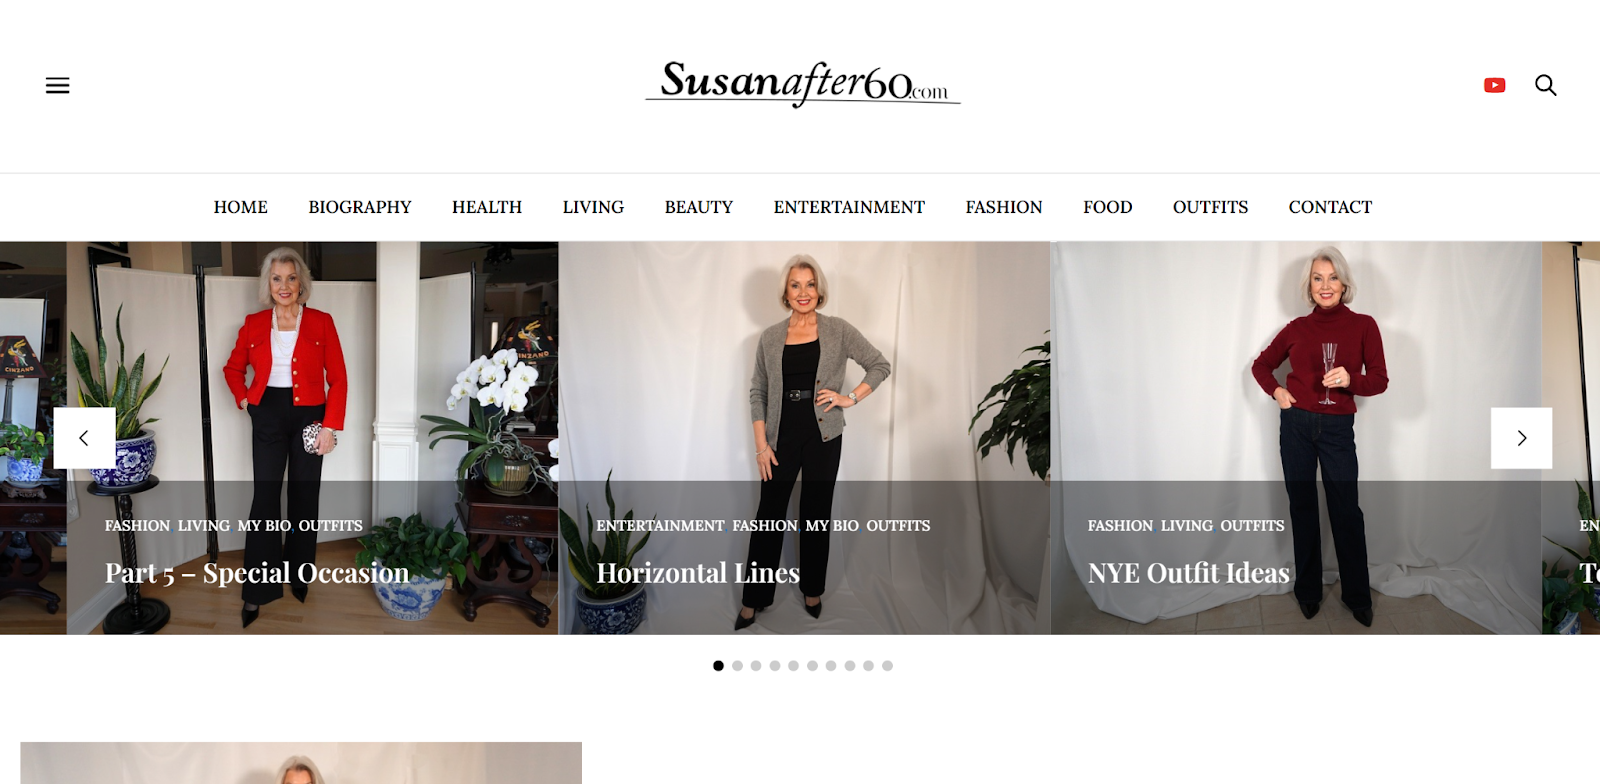 Susan After 60: A blog that gives fashion and beauty tips for women over 60.